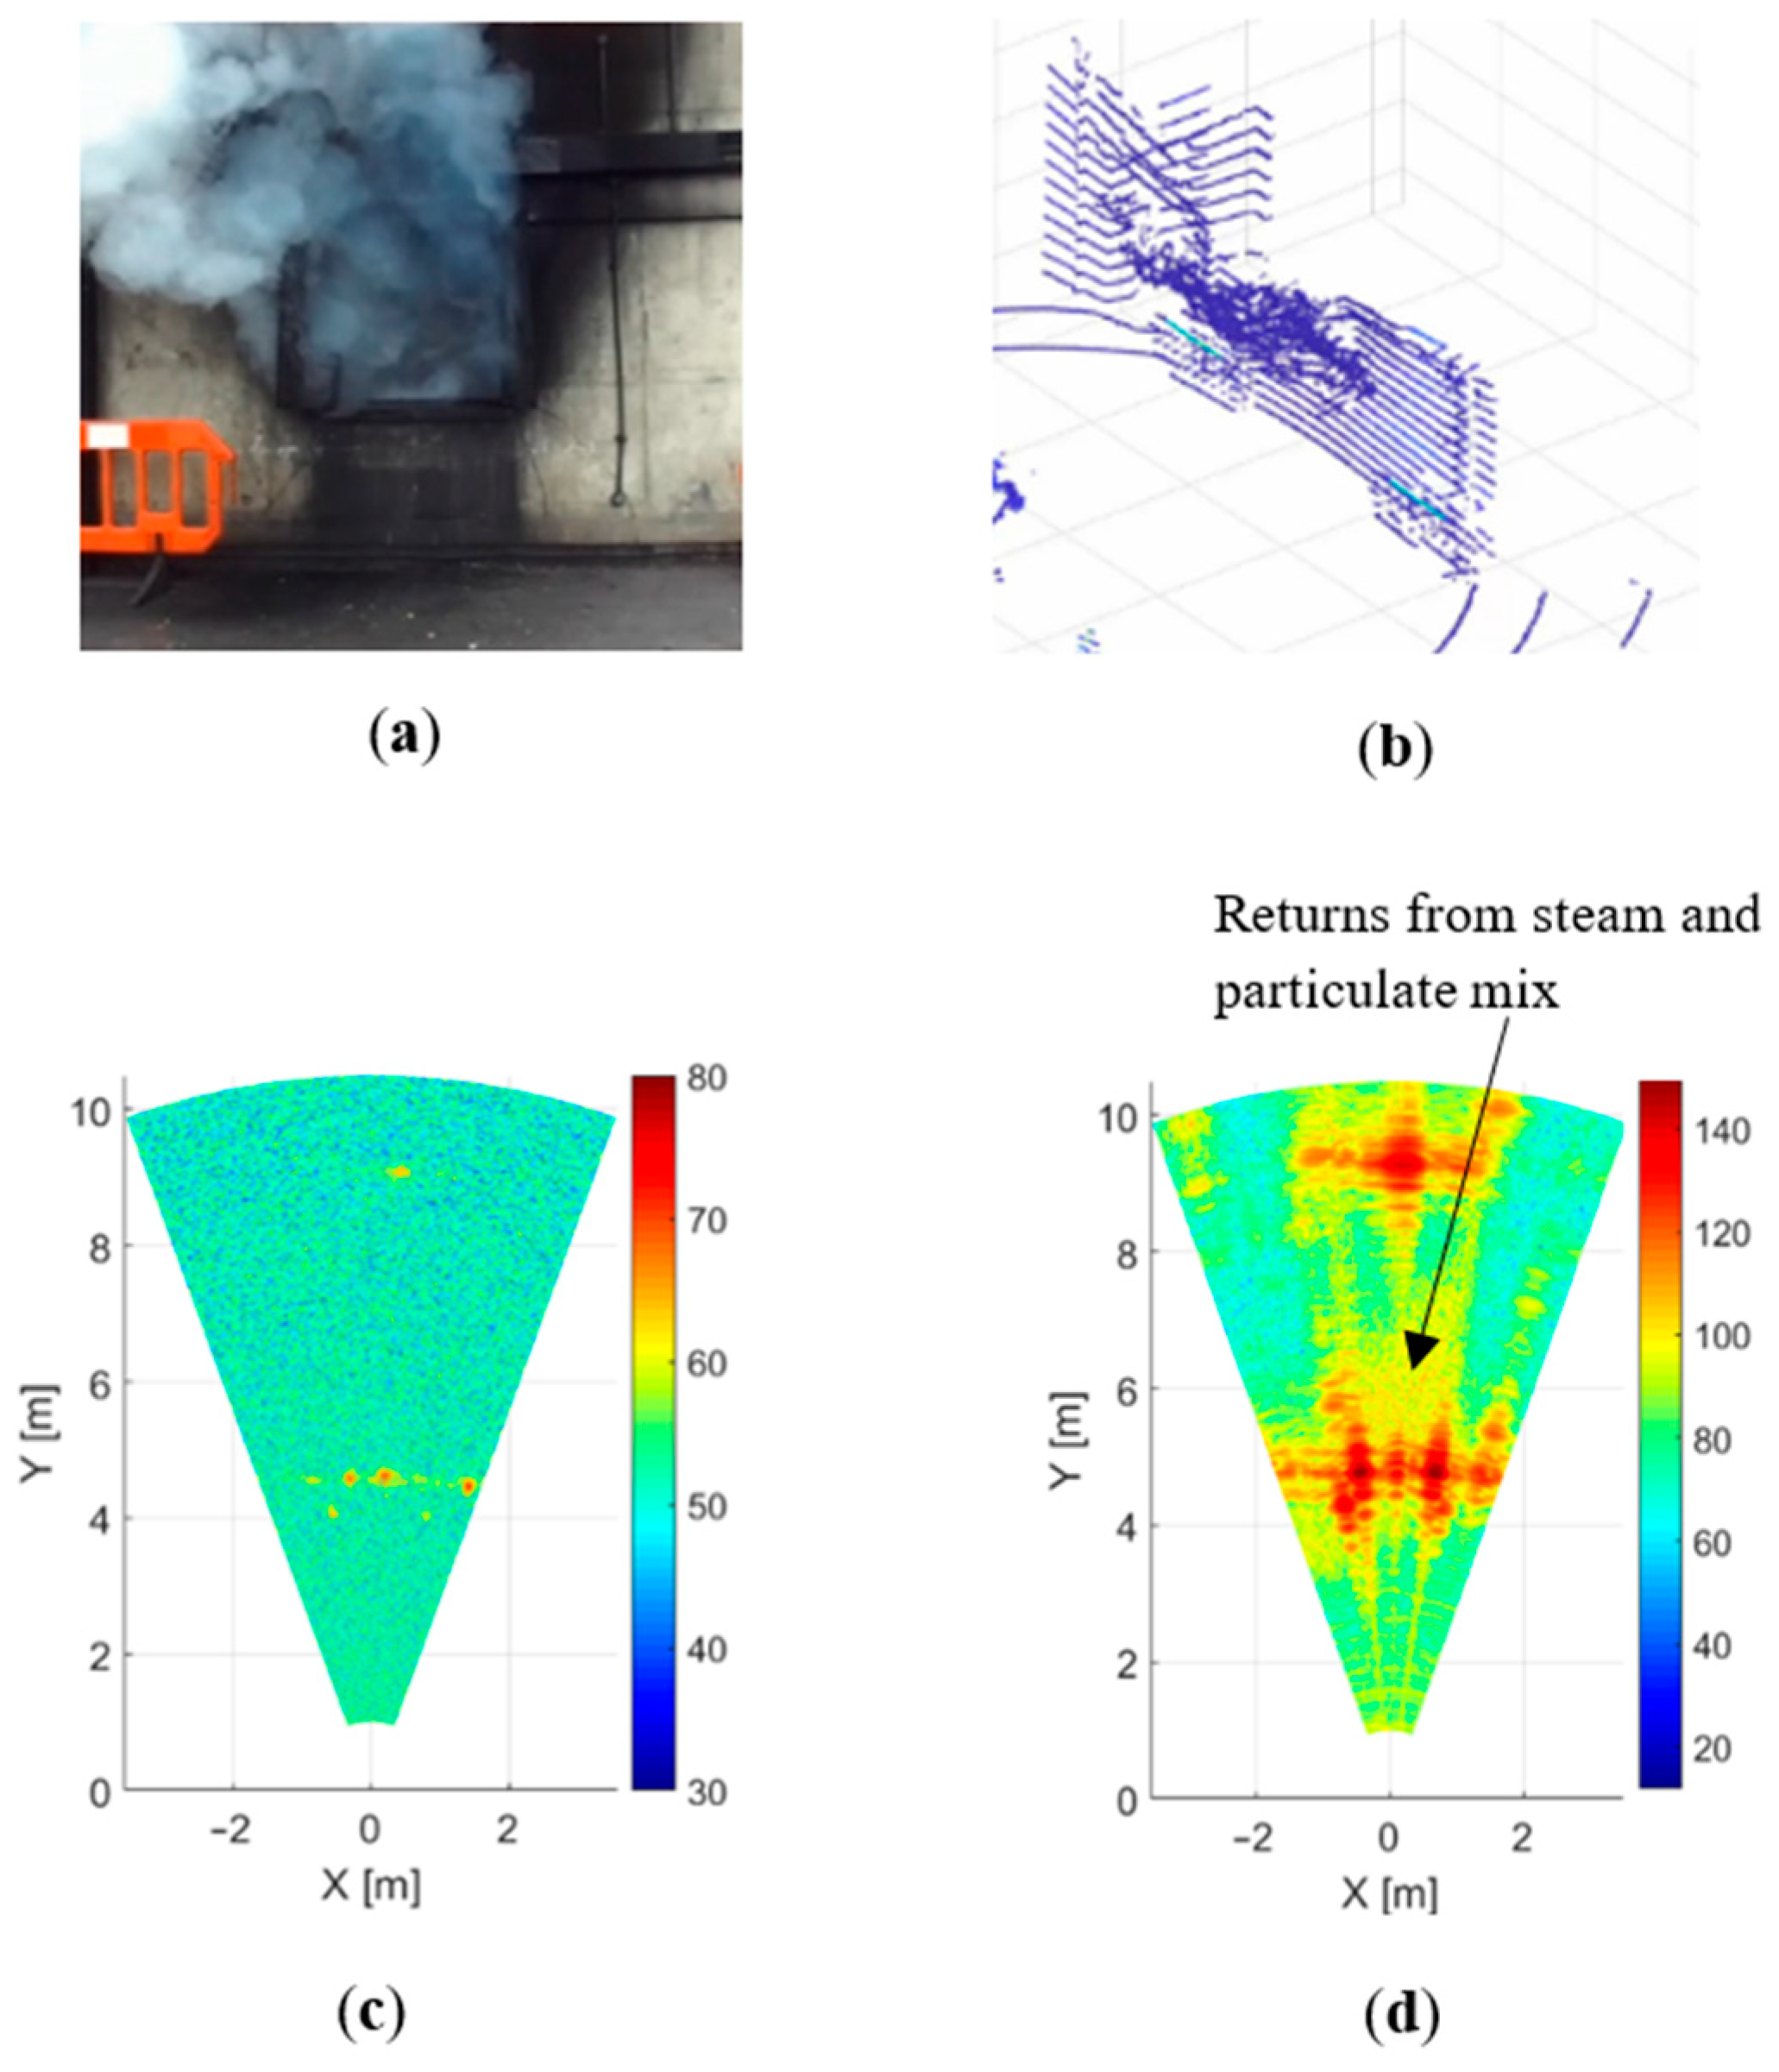 Sensors Free Full Text Experimental Evaluation Of 79 And 300 Ghz Radar Performance In Fire Environments Html